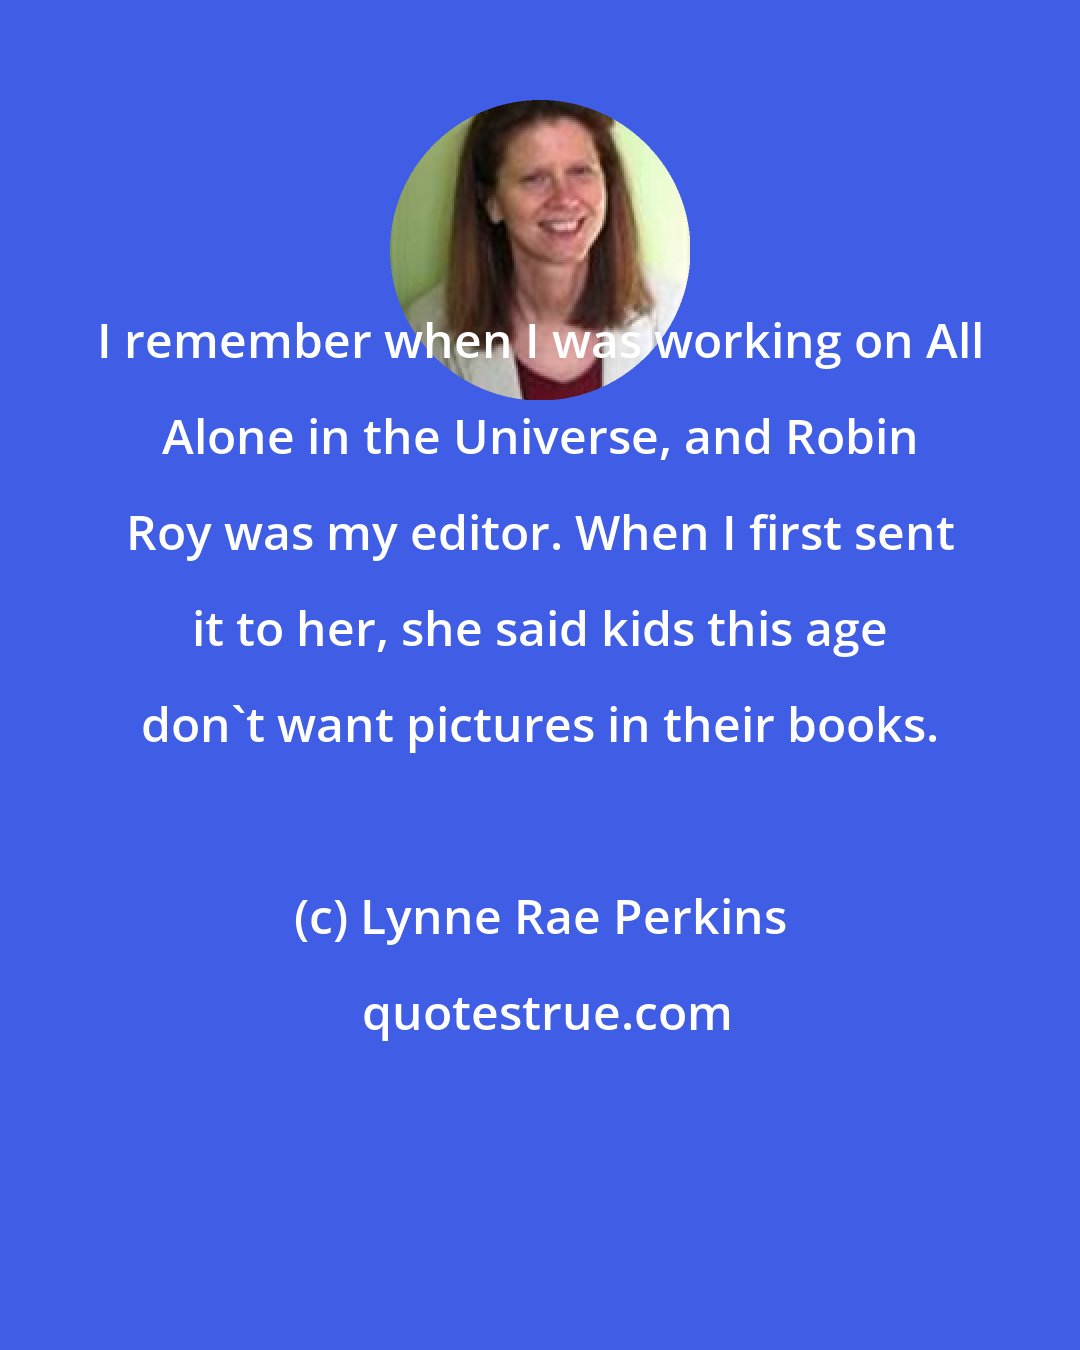 Lynne Rae Perkins: I remember when I was working on All Alone in the Universe, and Robin Roy was my editor. When I first sent it to her, she said kids this age don't want pictures in their books.